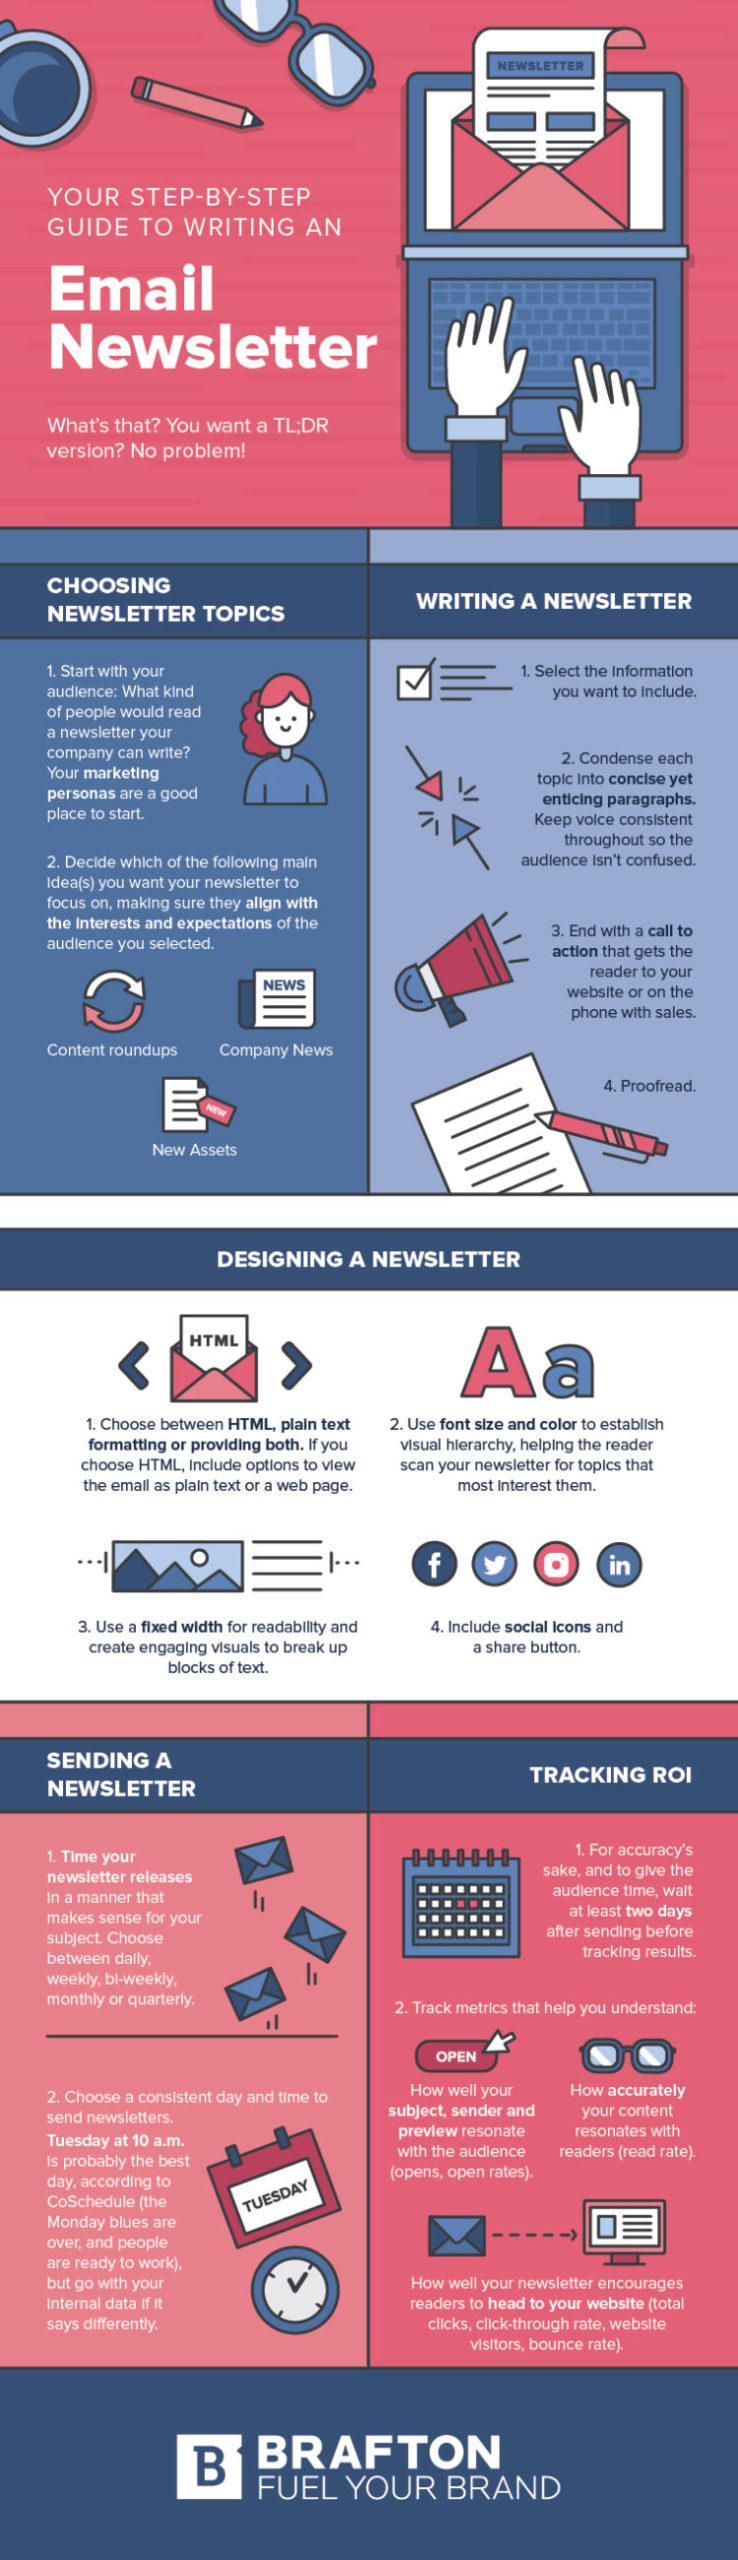 Good infographic example: email newsletter